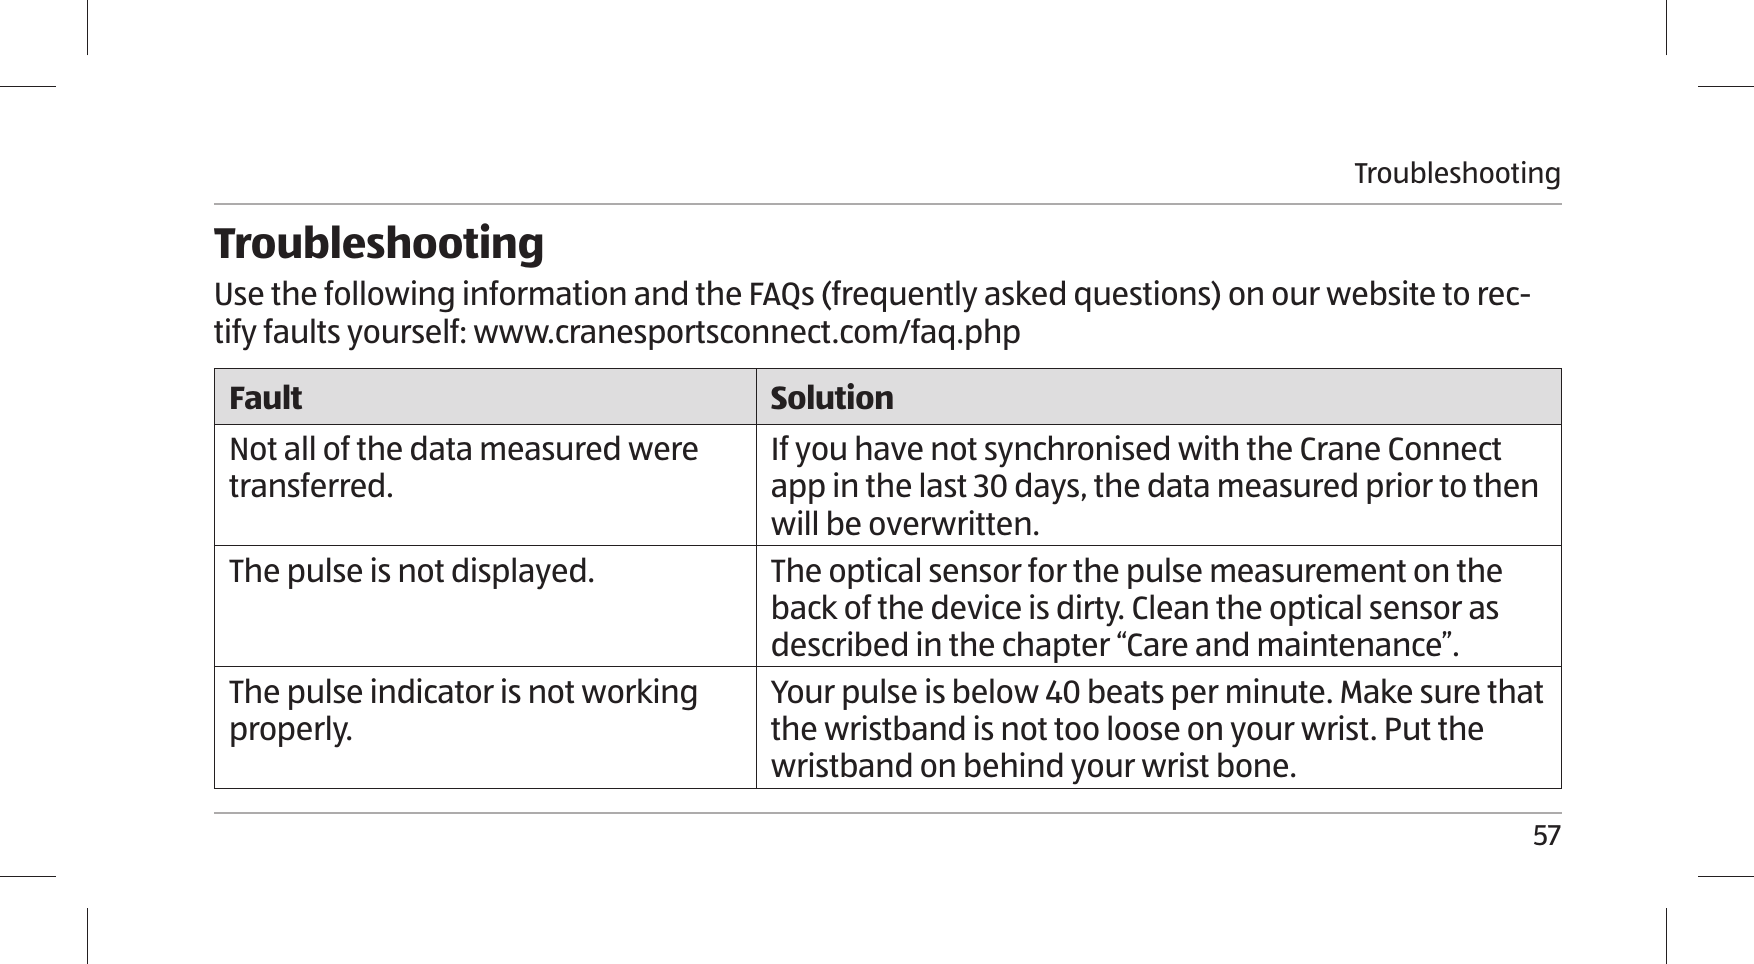 Troubleshooting57TroubleshootingUse the following information and the FAQs (frequently asked questions) on our website to rec-tify faults yourself: www.cranesportsconnect.com/faq.phpFault SolutionNot all of the data measured were transferred. If you have not synchronised with the Crane Connect app in the last 30 days, the data measured prior to then will be overwritten.The pulse is not displayed. The optical sensor for the pulse measurement on the back of the device is dirty. Clean the optical sensor as described in the chapter “Care and maintenance”.The pulse indicator is not working properly.Your pulse is below 40 beats per minute. Make sure that the wristband is not too loose on your wrist. Put the wristband on behind your wrist bone.